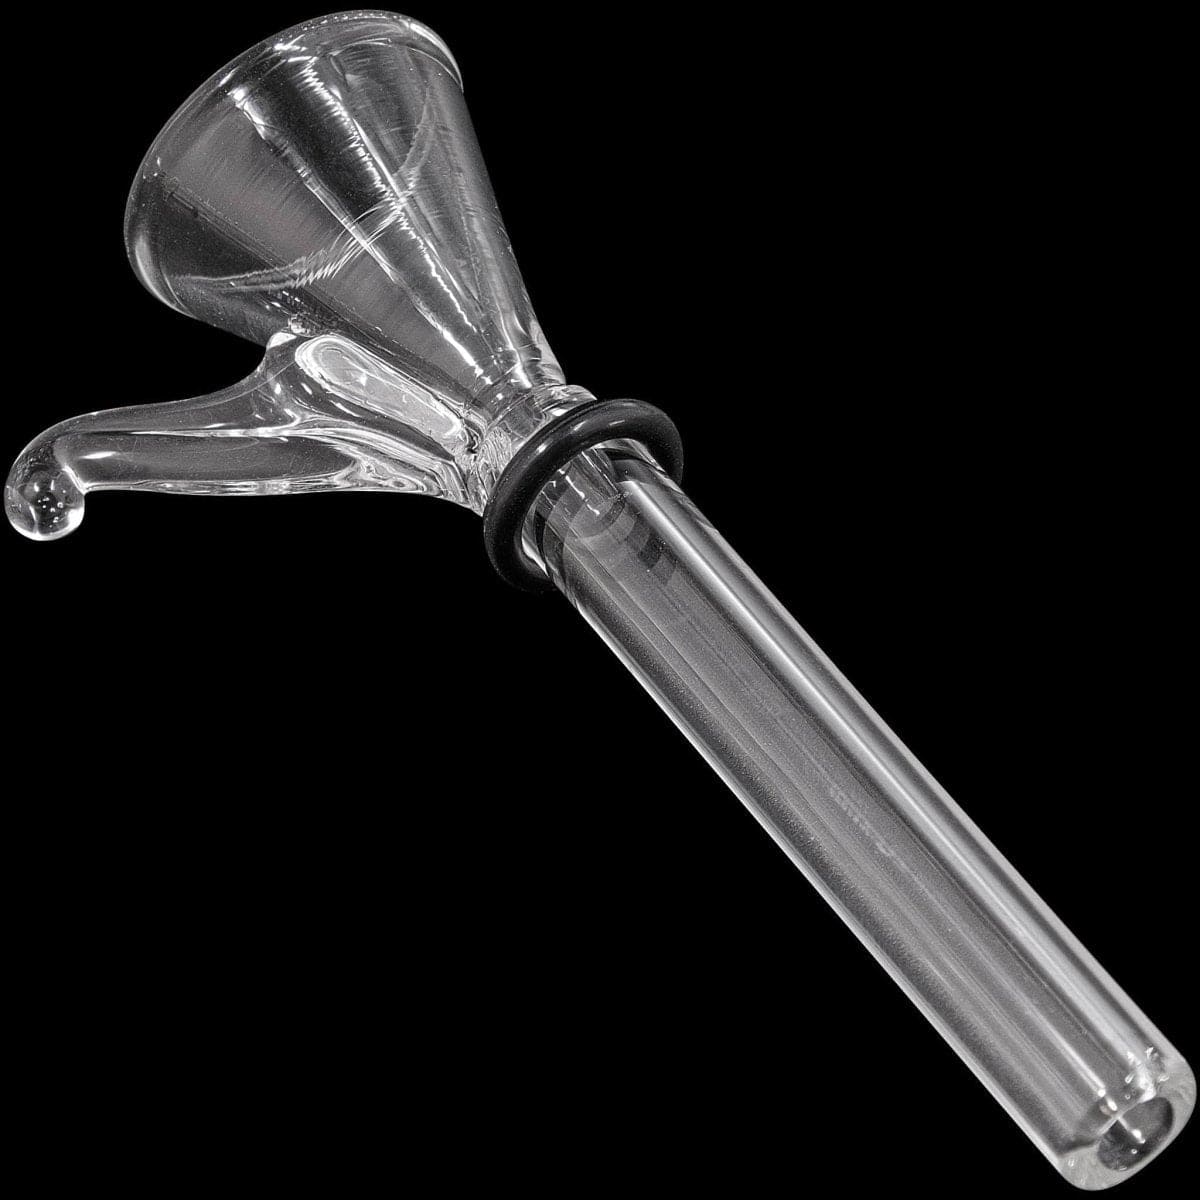 LA Pipes Smoking Accessory Clear 9mm Funnel Slide Bowl with Handle for Pull-Stem Bongs